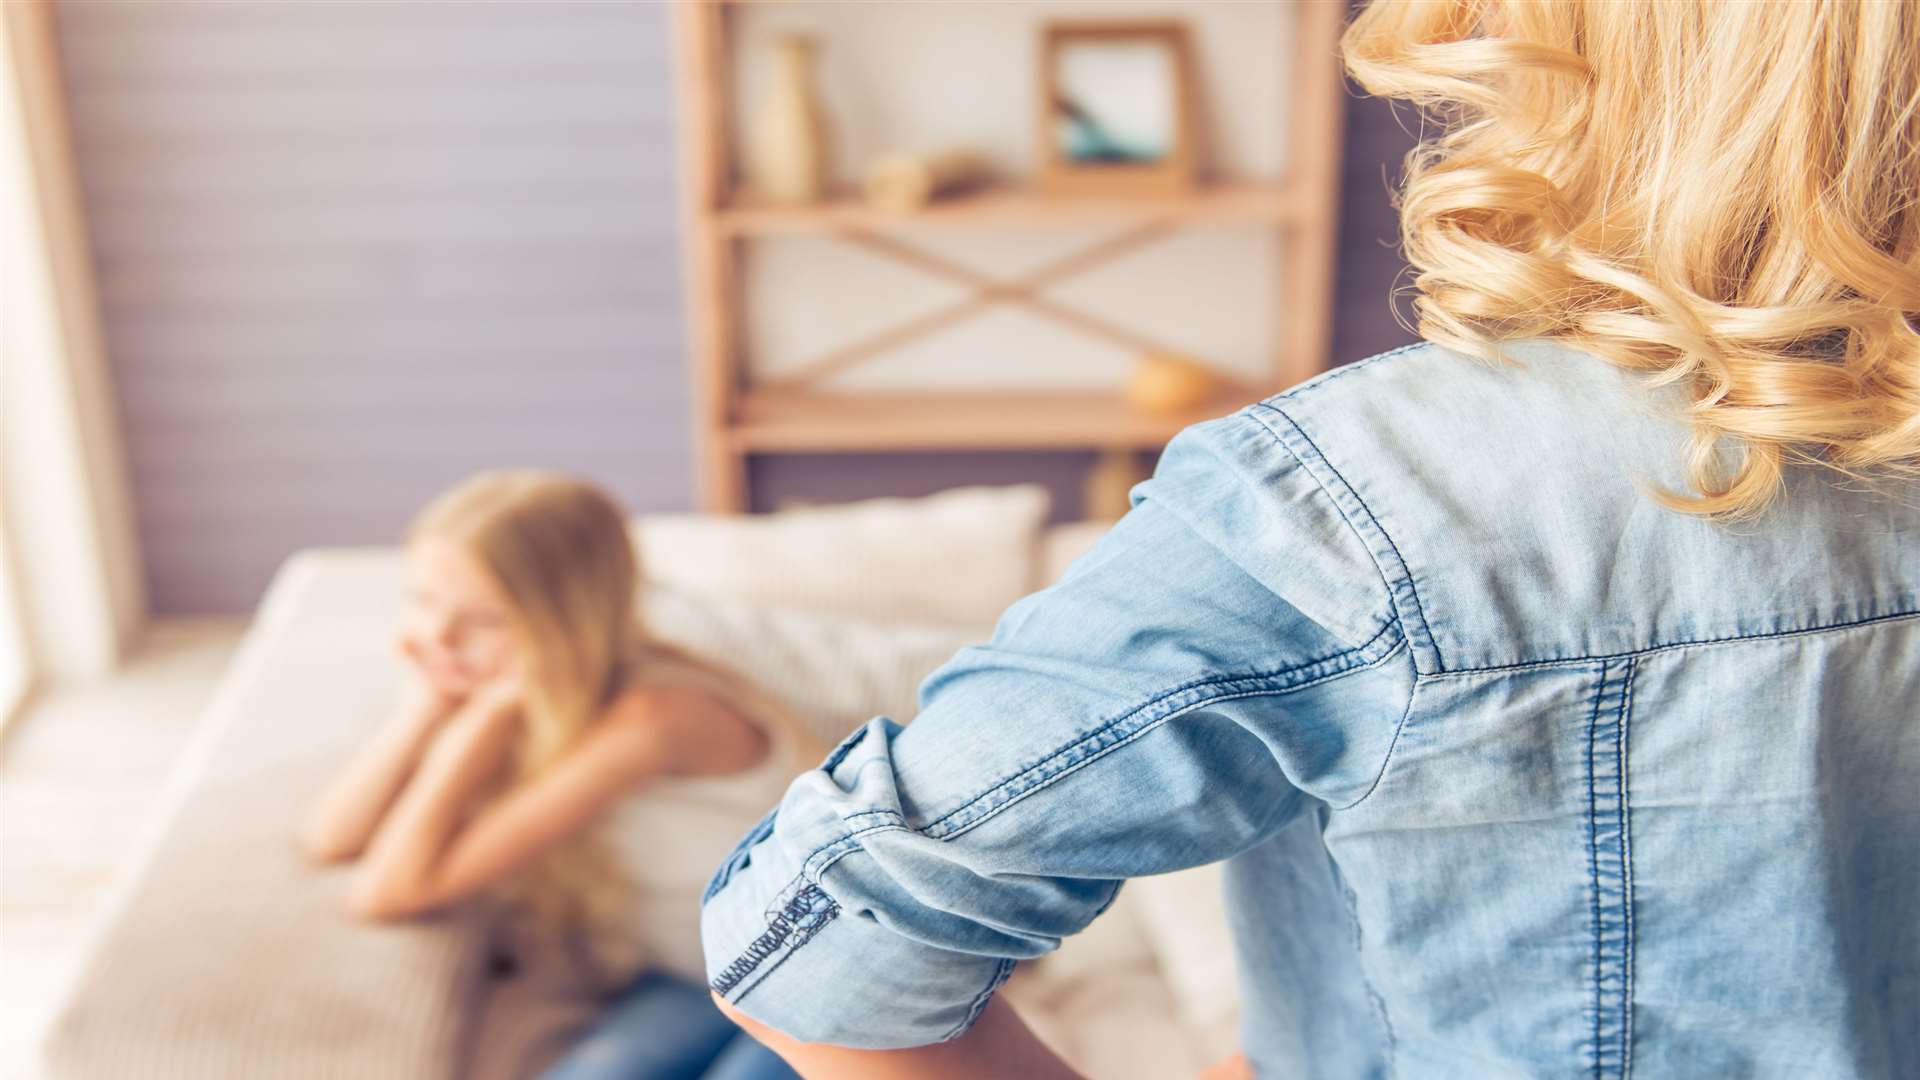 Dealing with teen rage can be tough for parents